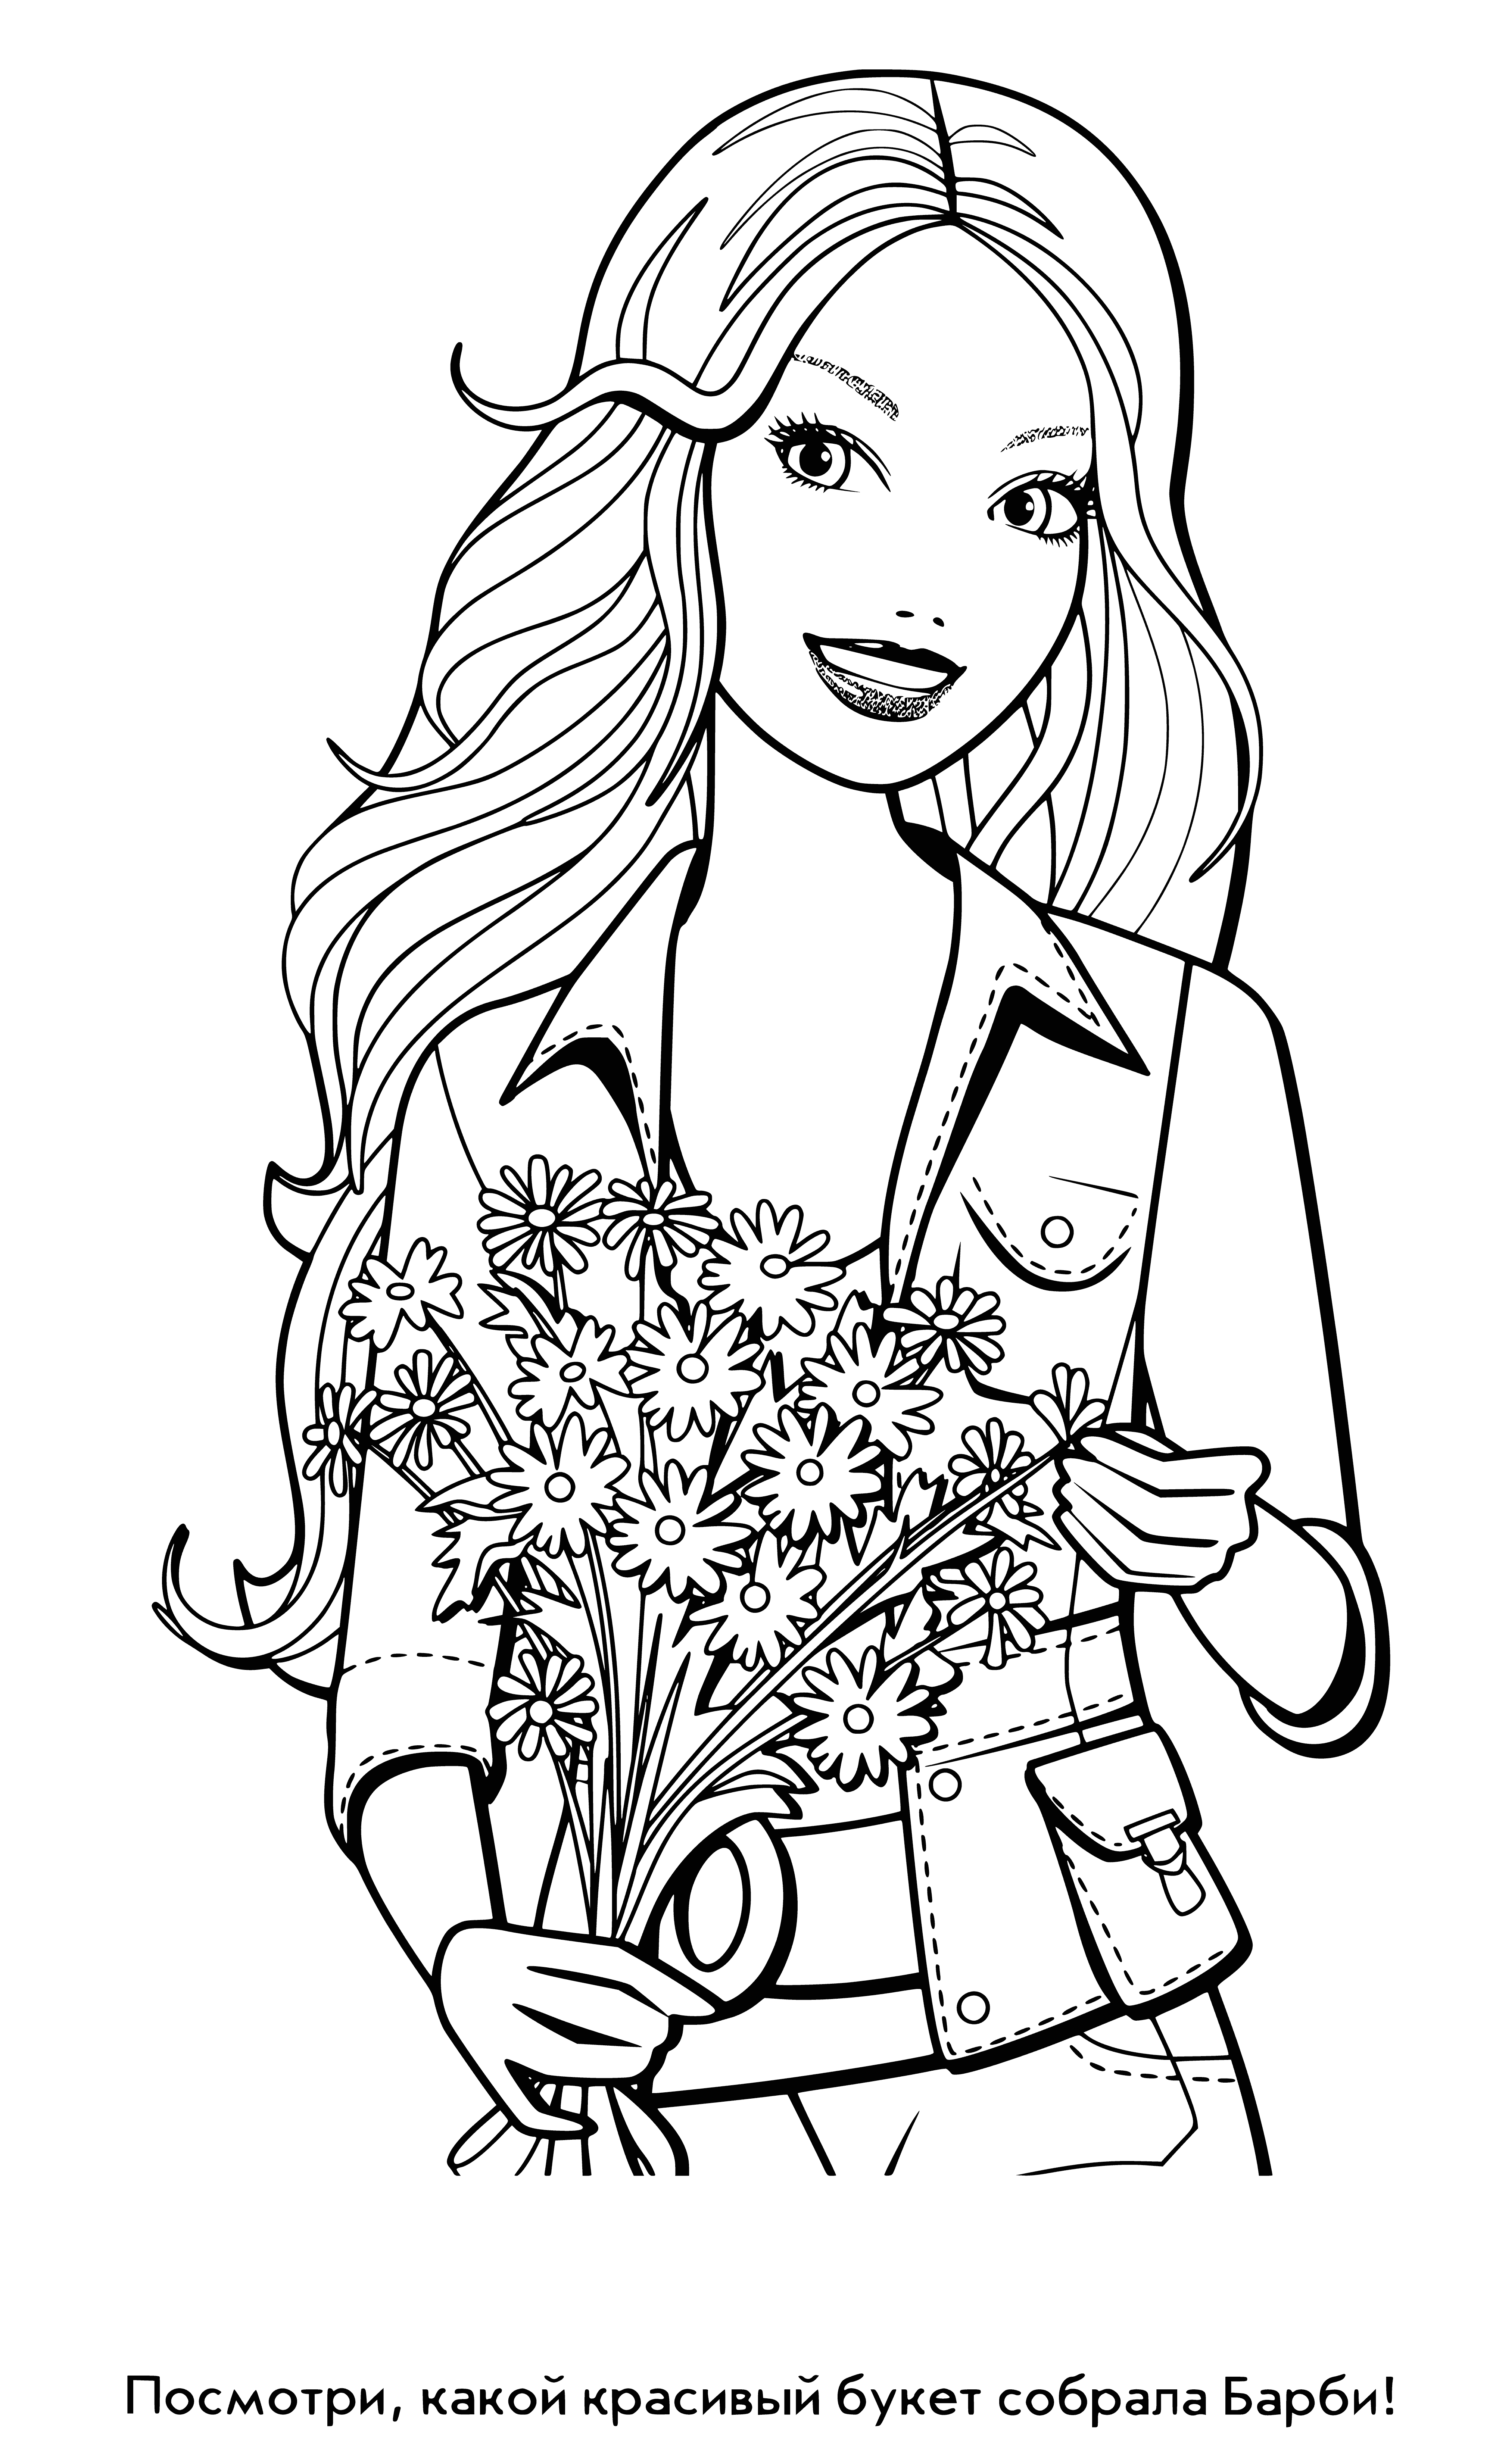 coloring page: Barbie doll in pink dress holds bouquet. Blonde hair. Perfect for coloring! #coloringpages #barbiedoll